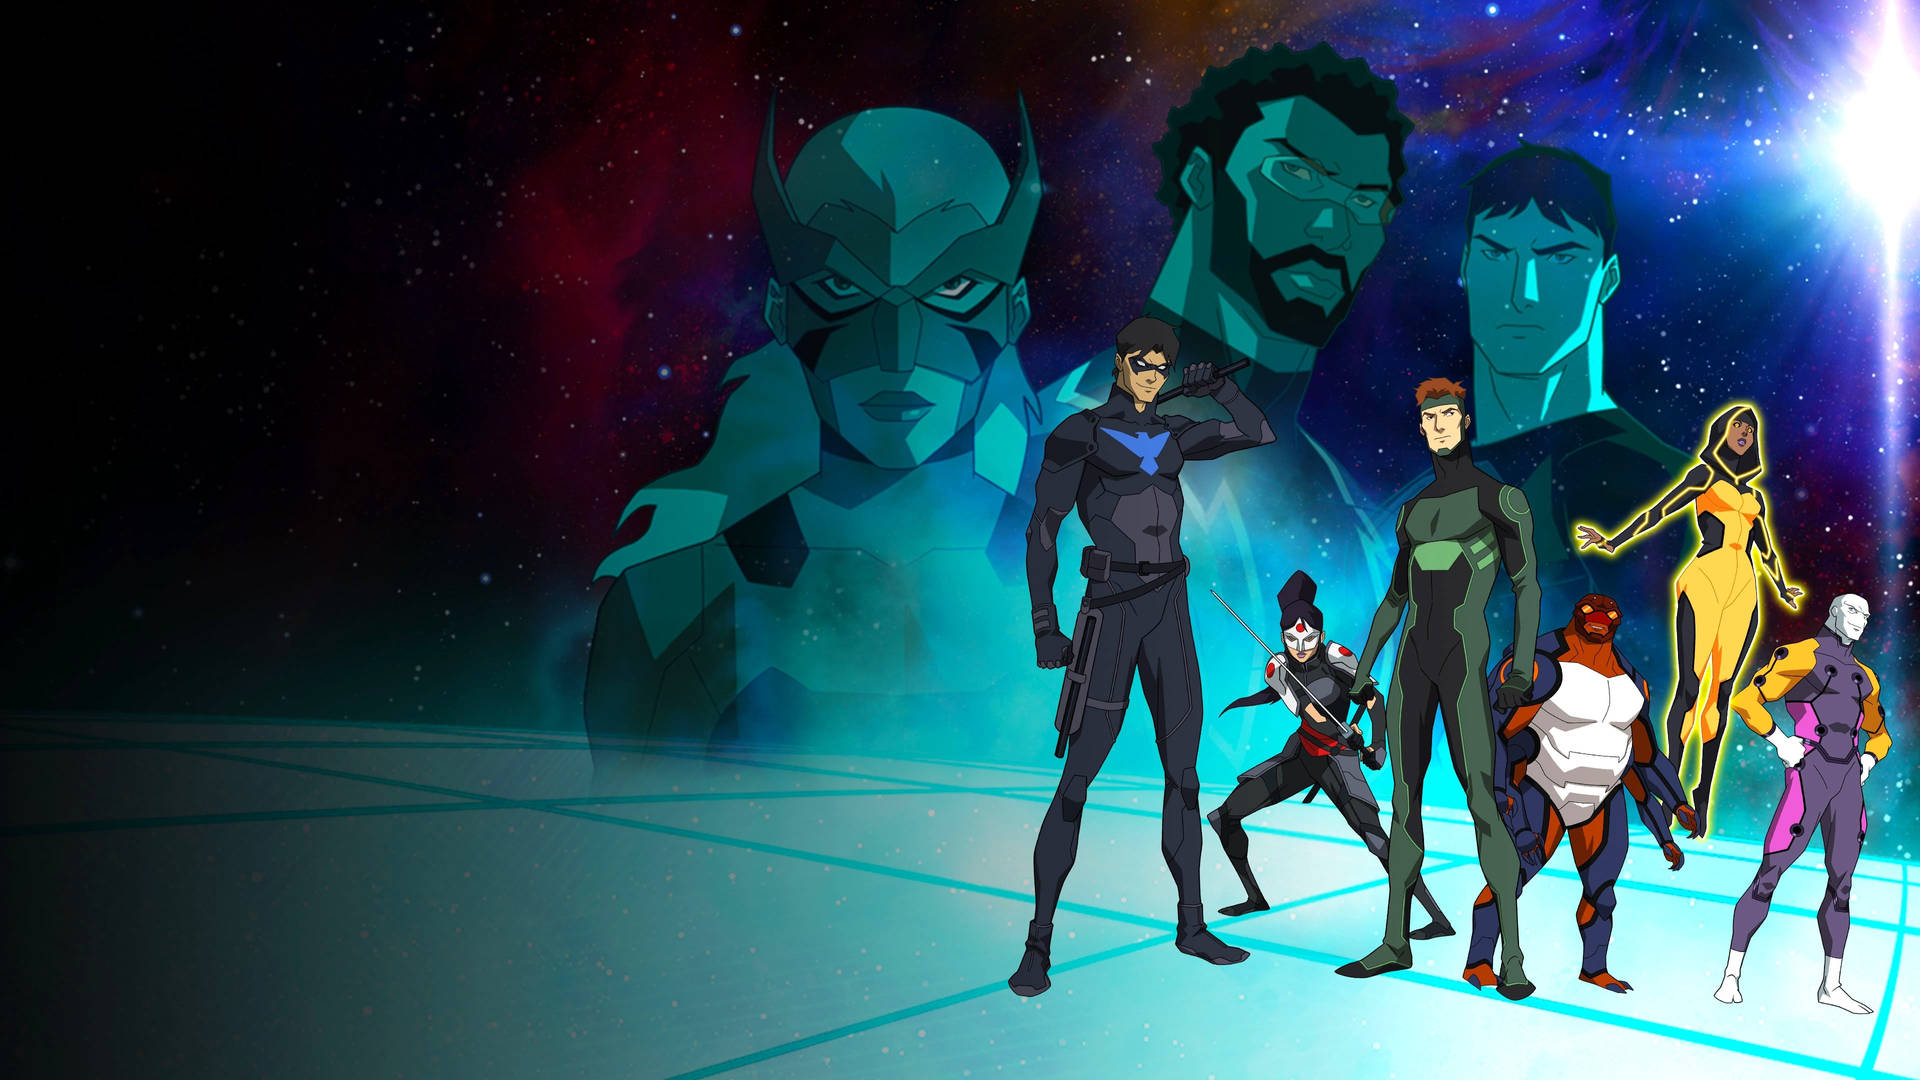 Young Justice Outsiders